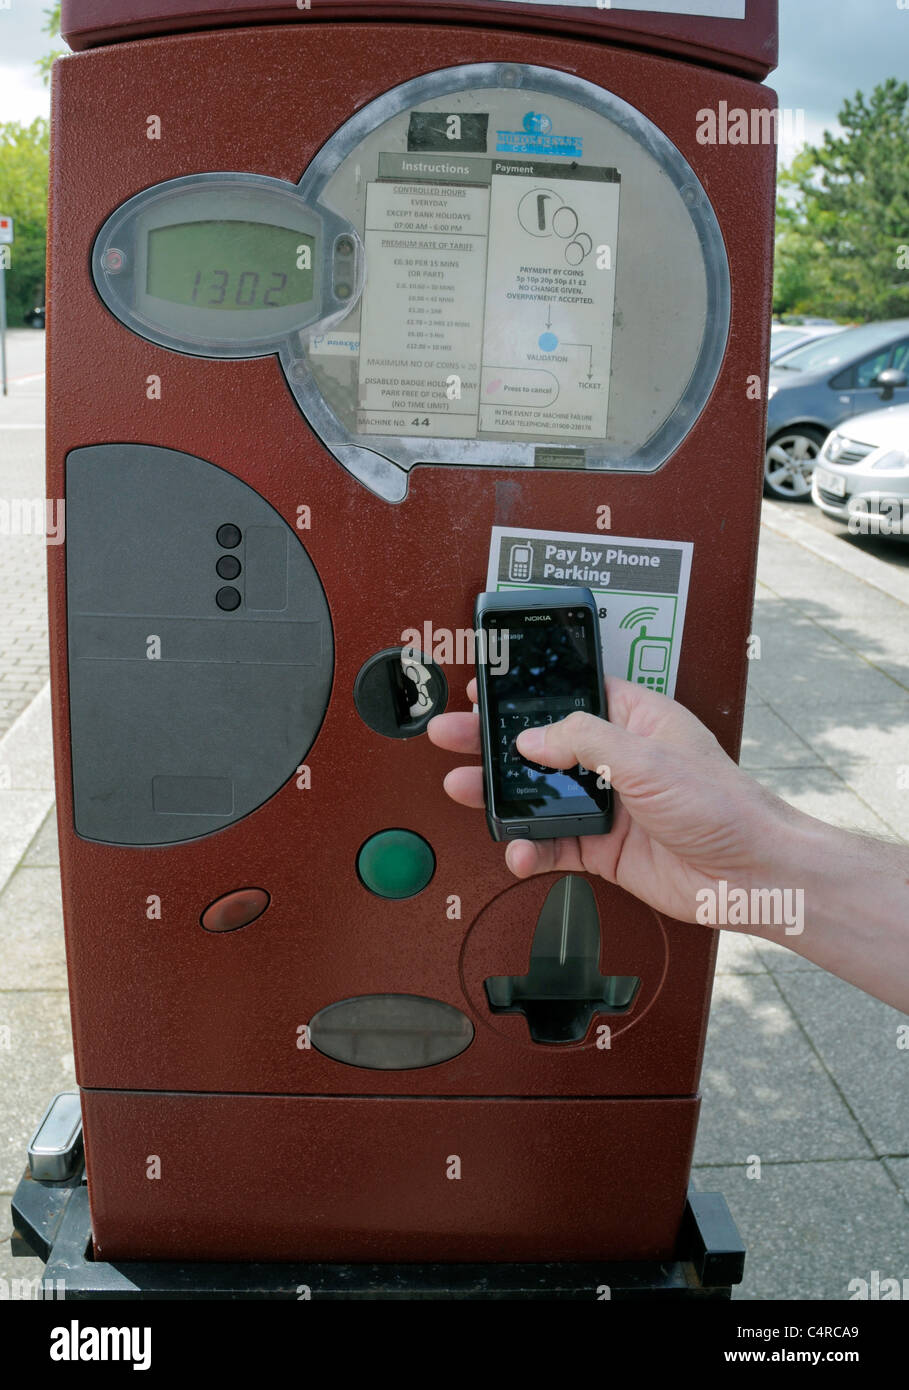 A Pay by Mobile Phone Parking Meter with Man holding Mobile Phone in Hand ready to Pay Charges Stock Photo